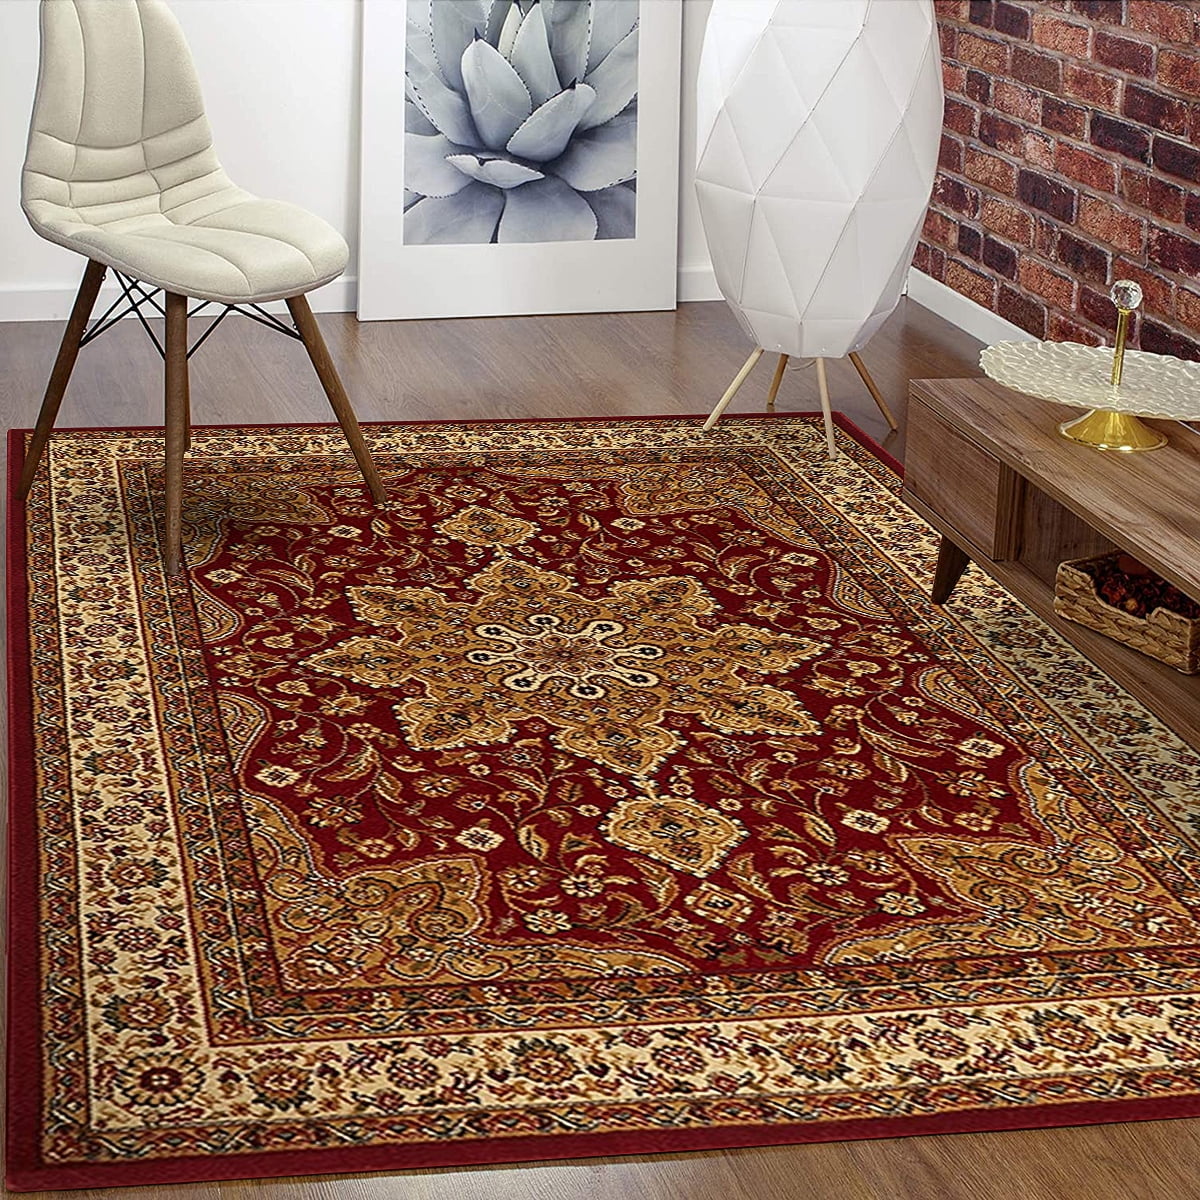 Area Rug Beige Oriental Style Floor Carpet Small Large Sizes Low Pile 